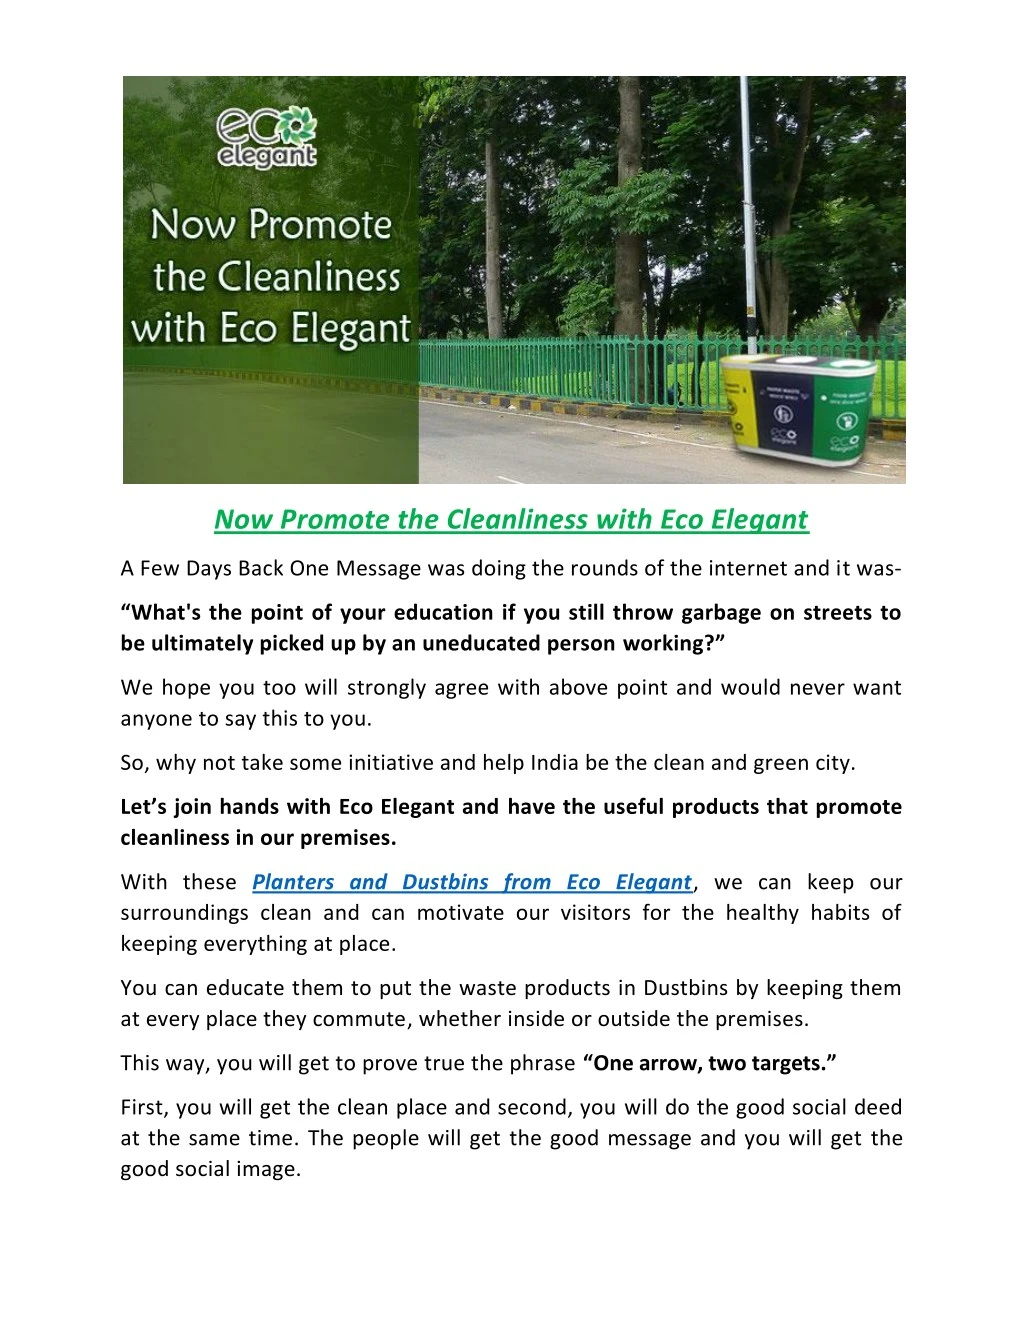 now promote the cleanliness with eco elegant